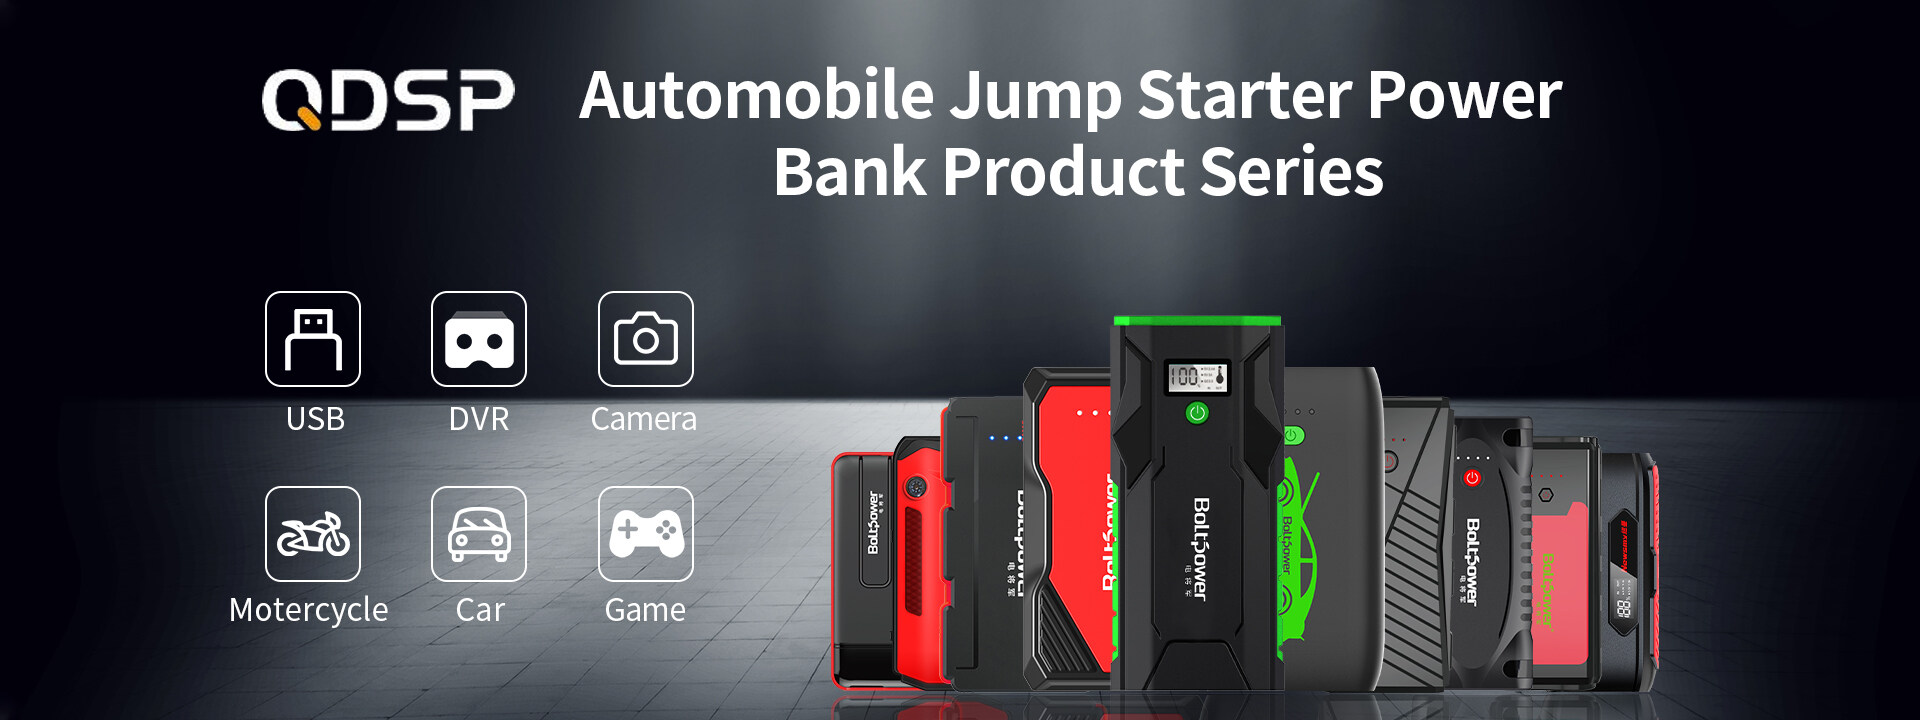 Portable Power Station Car Jump Starter Home Energy Storage Power System Aluminum-rich Lithium Cell 